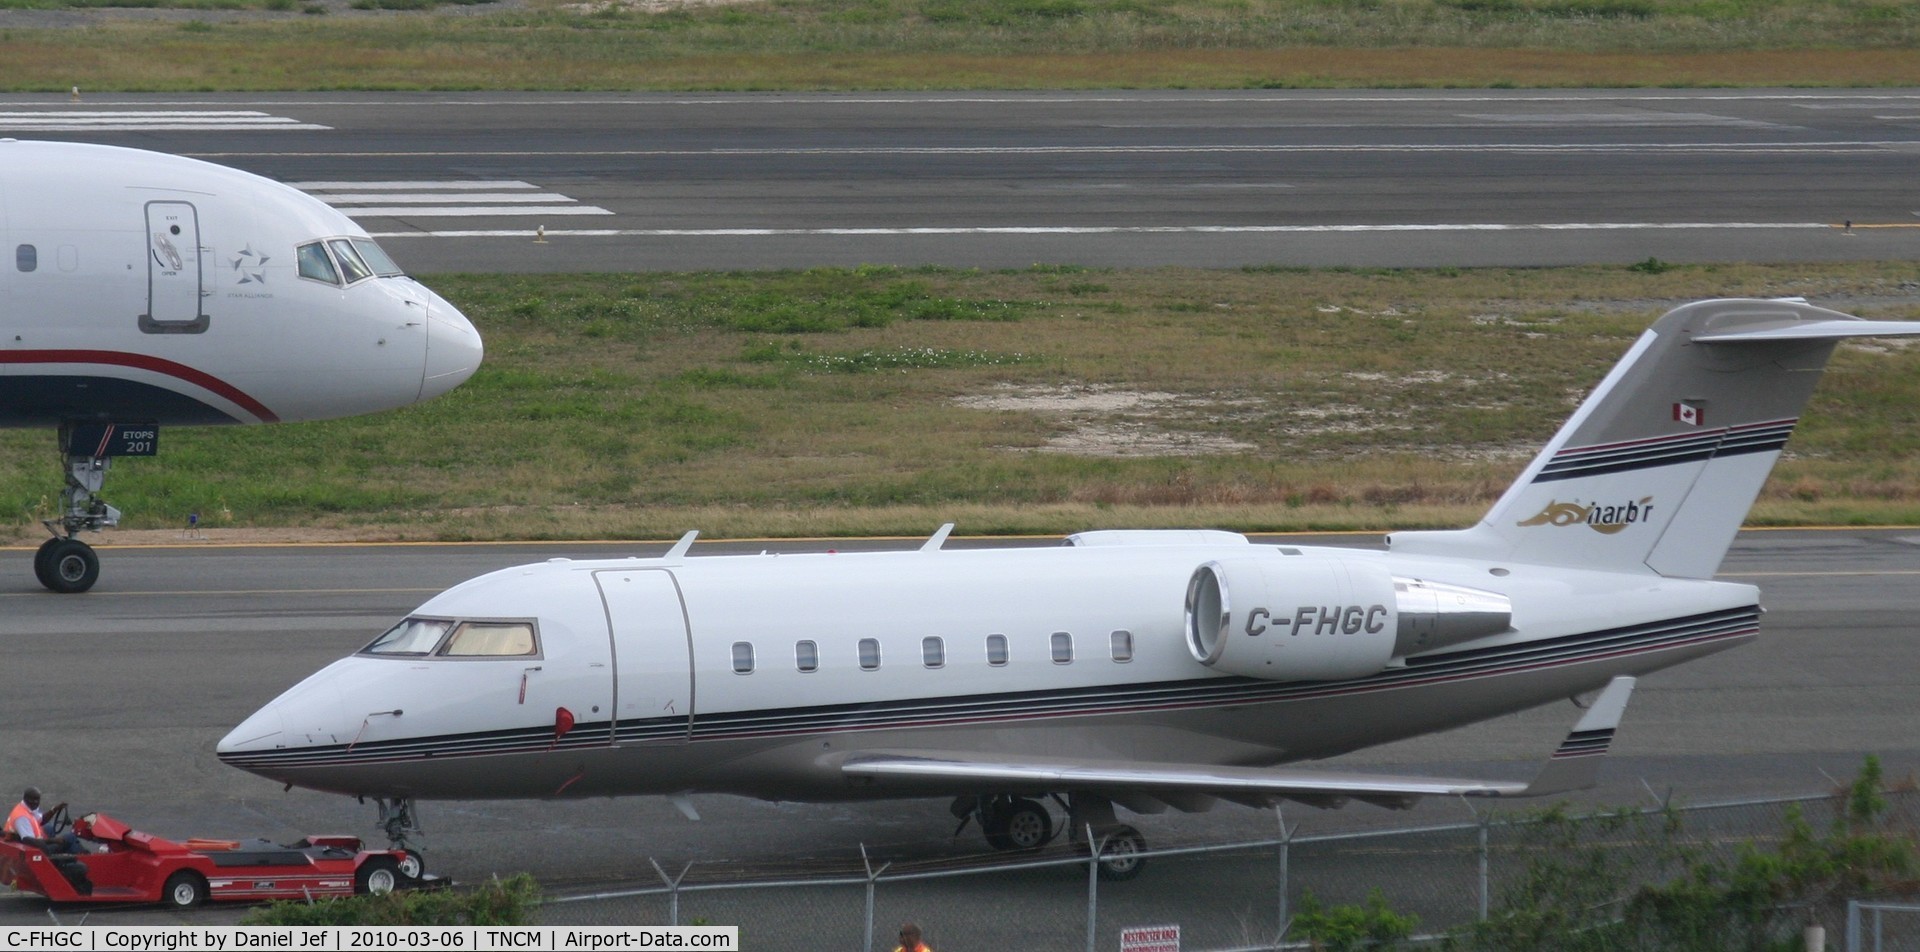 C-FHGC, Canadair Challenger 604 (CL-600-2B16) C/N 5453, C-FHGC BEING TOWED TO ITS PARKING POSITION AT THE CARGO RAMP.